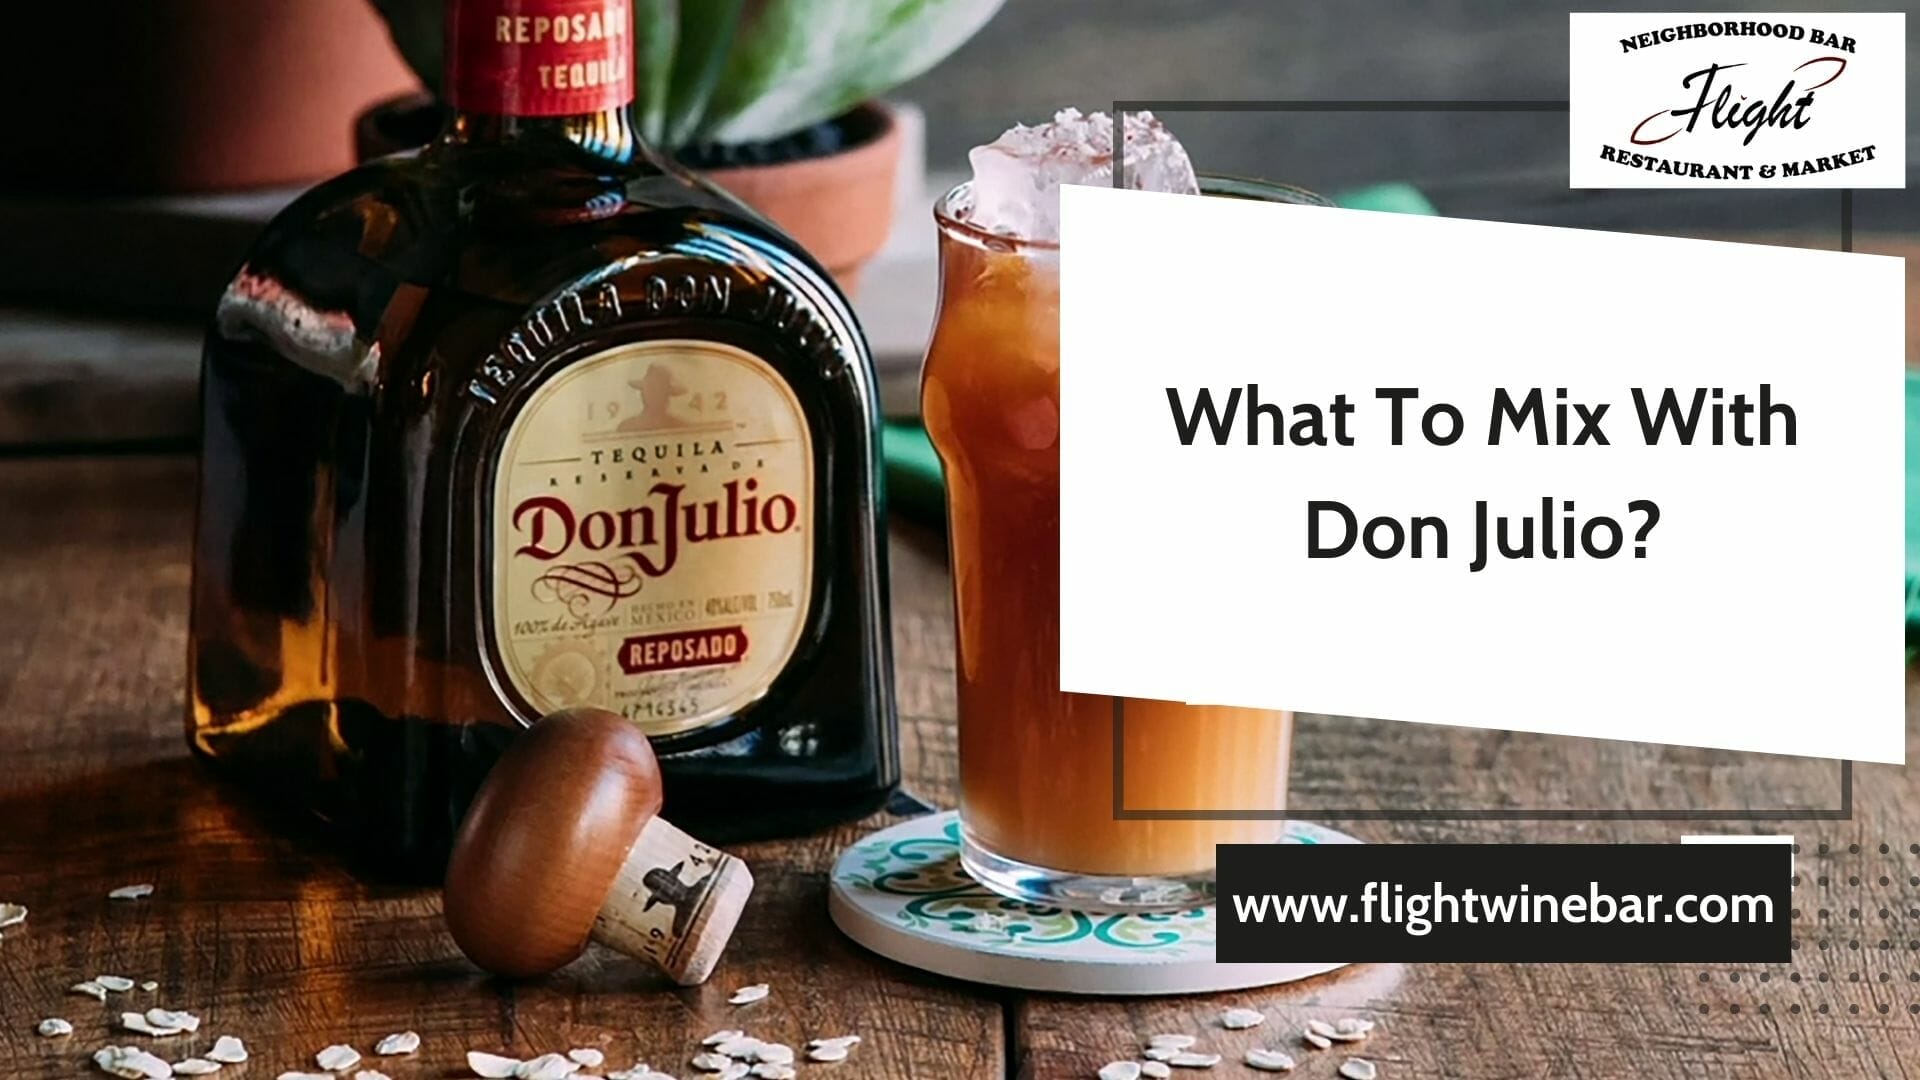 What To Mix With Don Julio